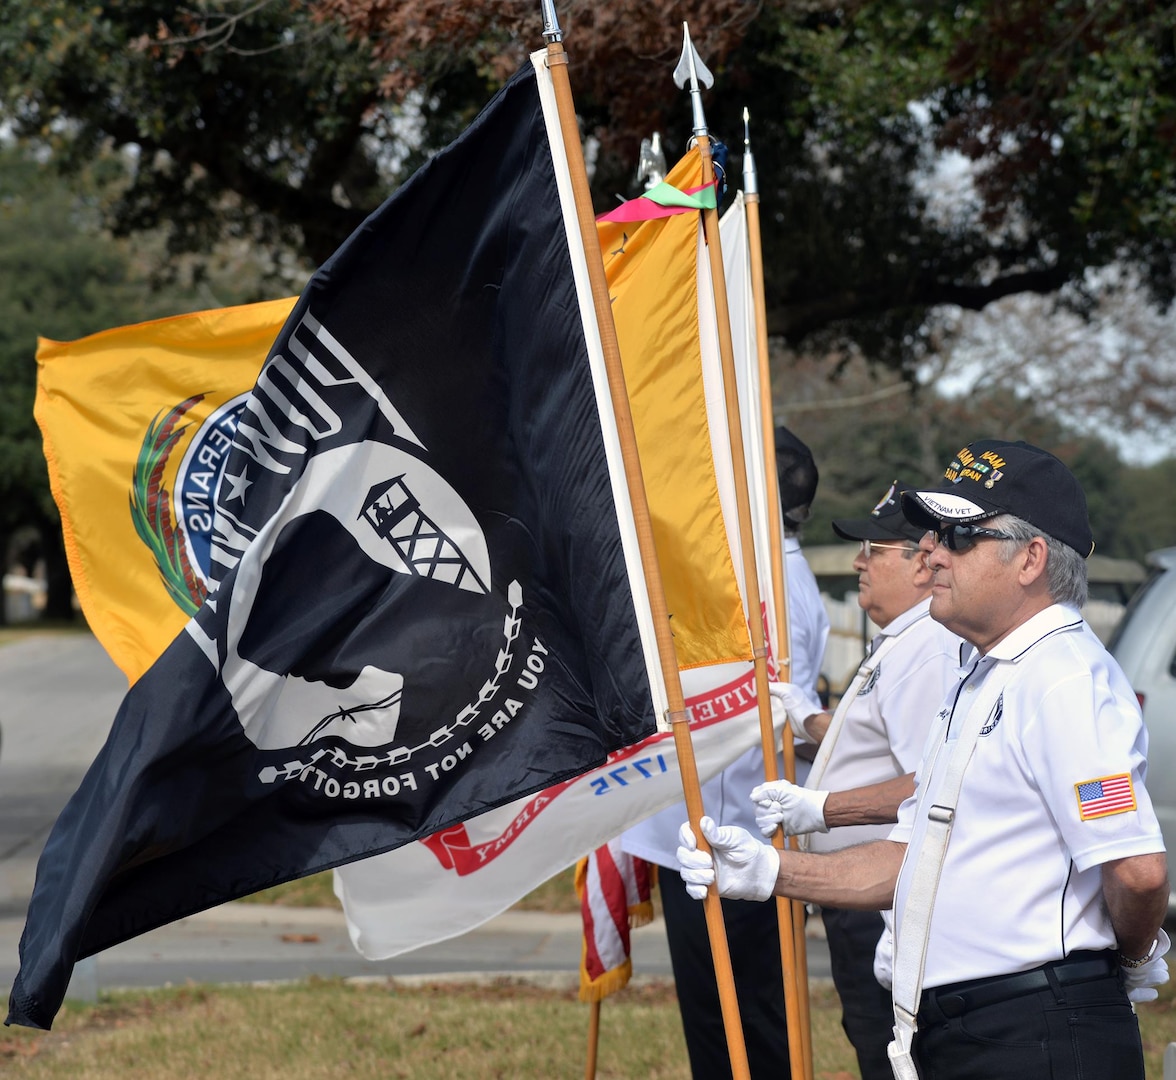 Members of the Fort Sam Houston Memorial Services Detachment Honor Guard hold the POW/MIA and other flags during the service for Cpl. Luis Patlan Torres at the Fort Sam Houston National Cemetery Jan. 13.